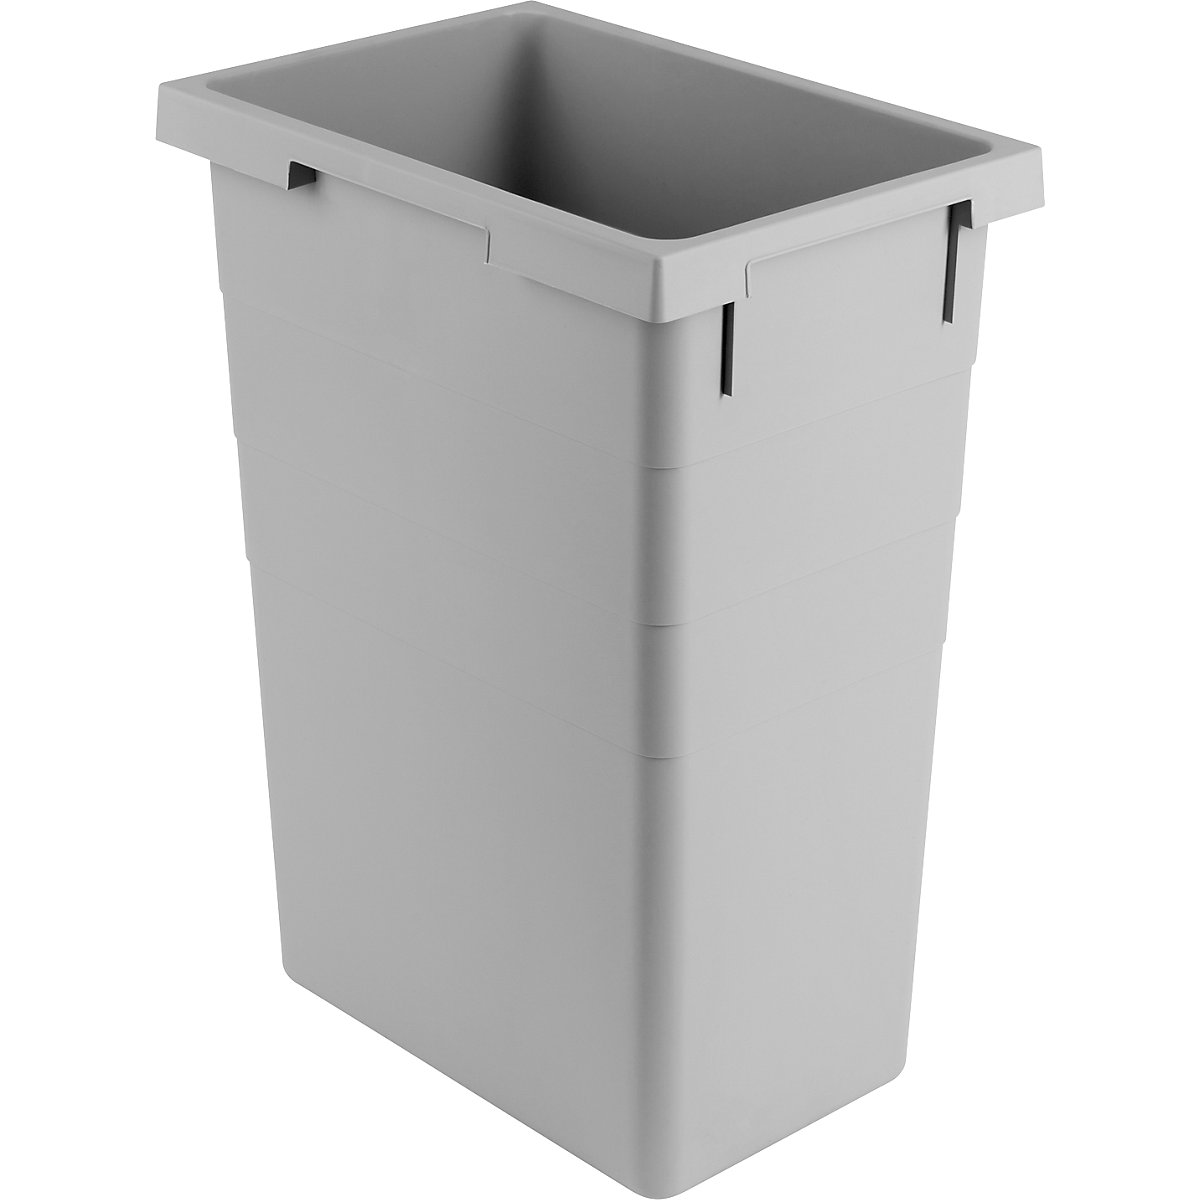 Replacement inner container - Hailo